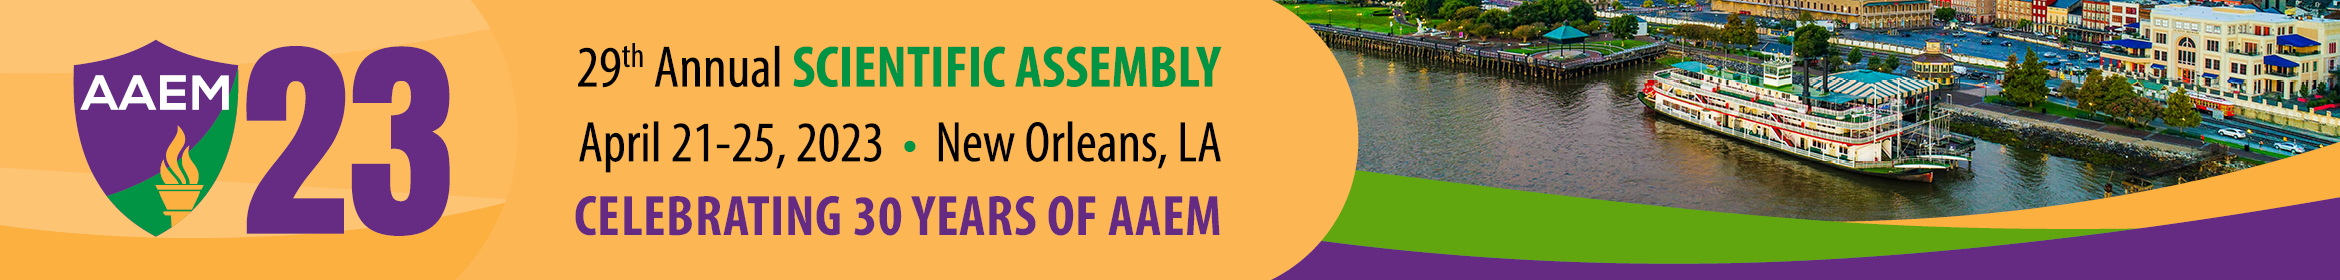 29th Annual Scientific Assembly Main banner